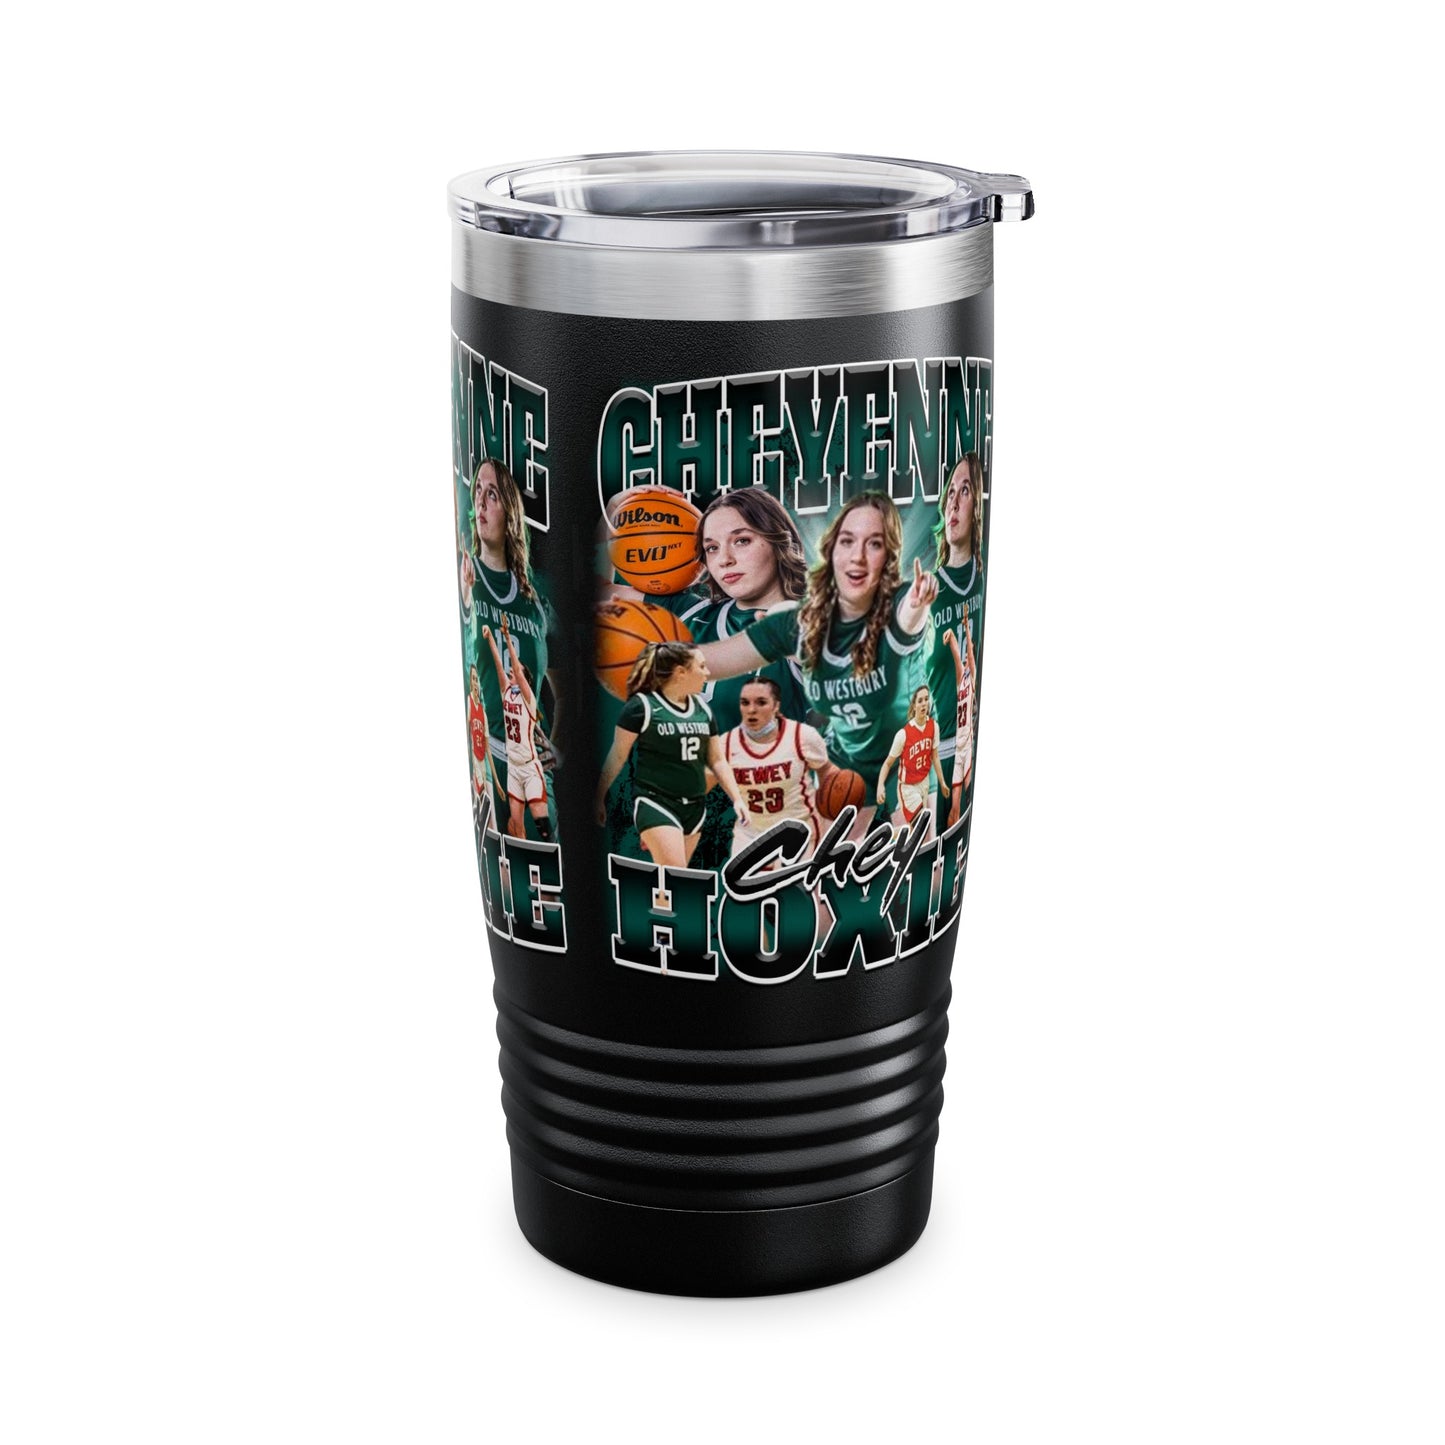 Cheyenne Hoxie Stainless Steal Tumbler